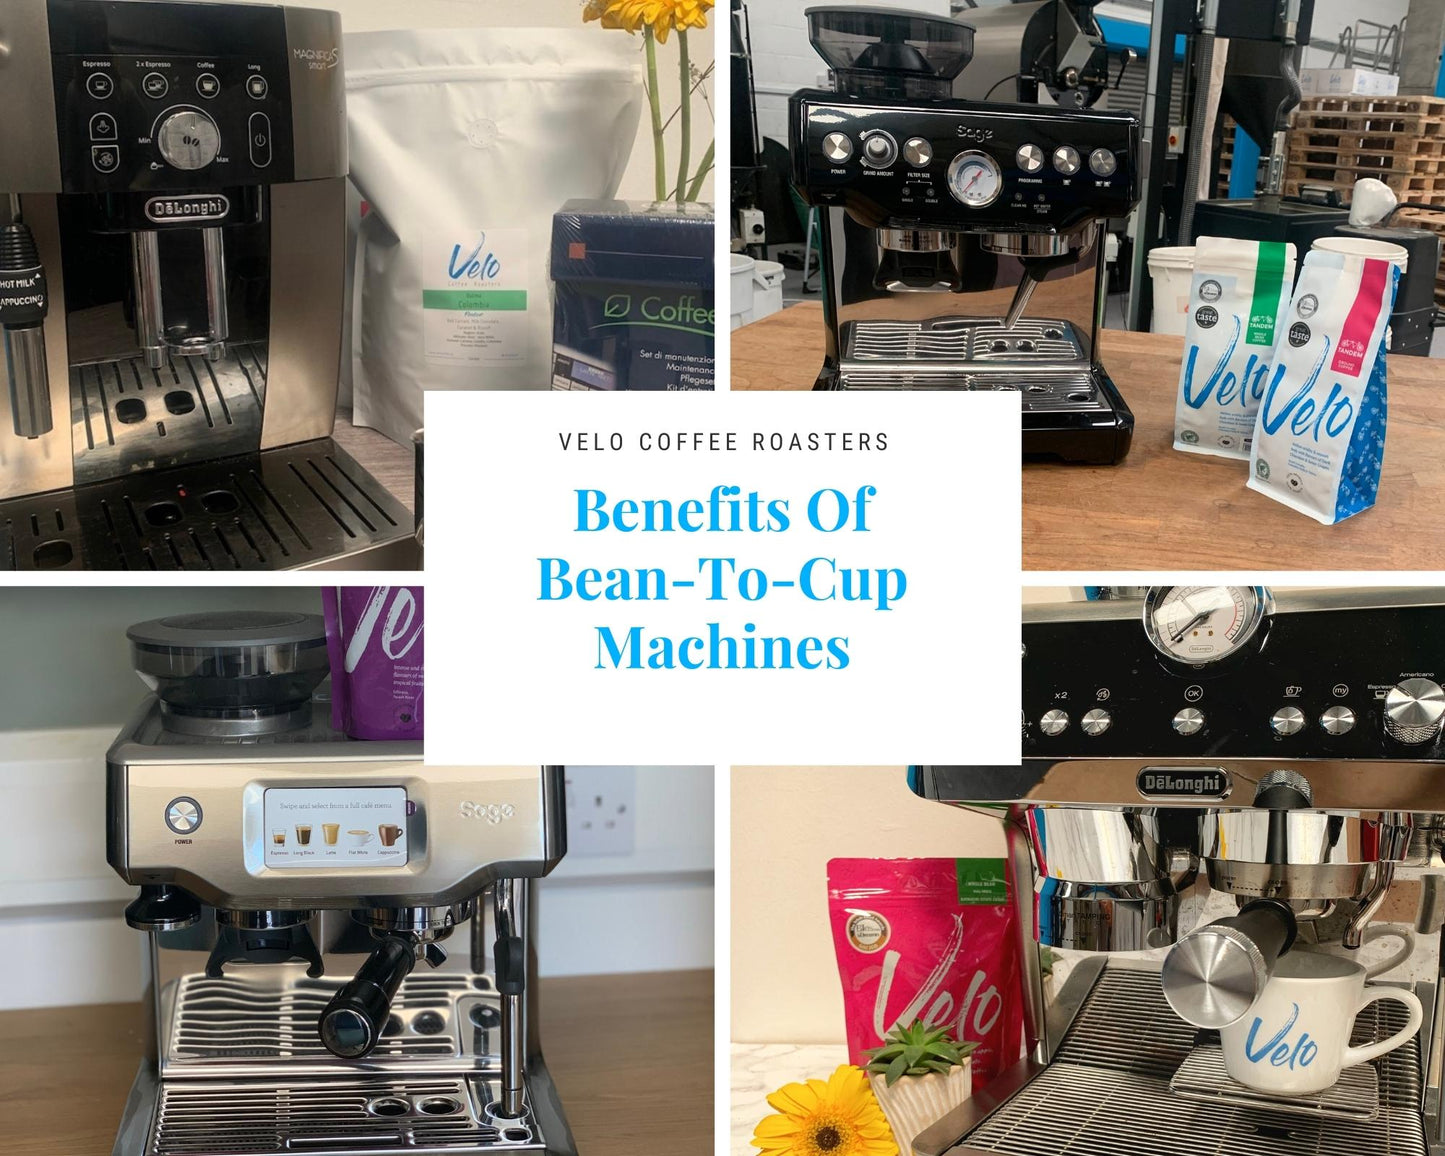 Benefits Of Bean-To-Cup Machines - Velo Coffee Roasters